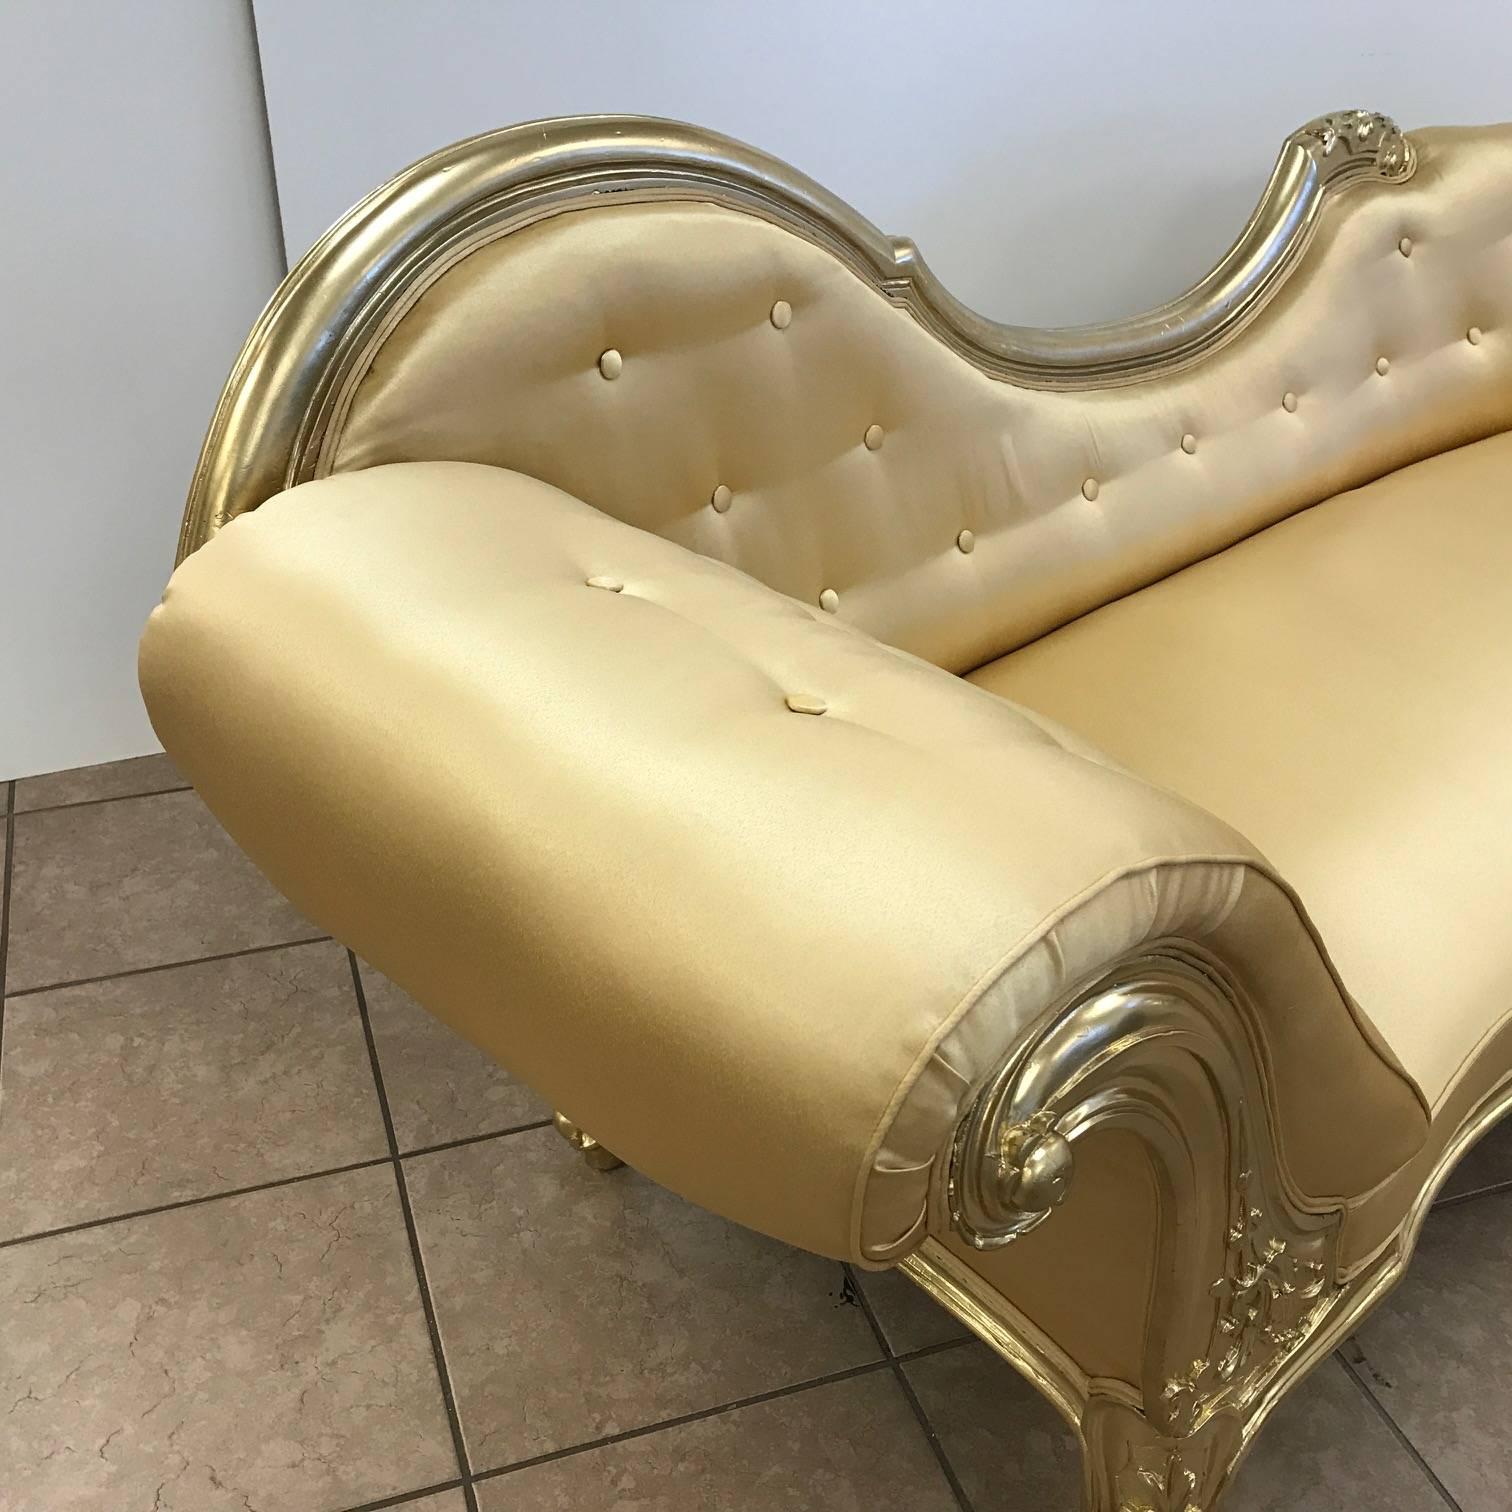 Late Victorian Victorian Chaise Lounge with Metallic Gold Finish Upholstered in Satin